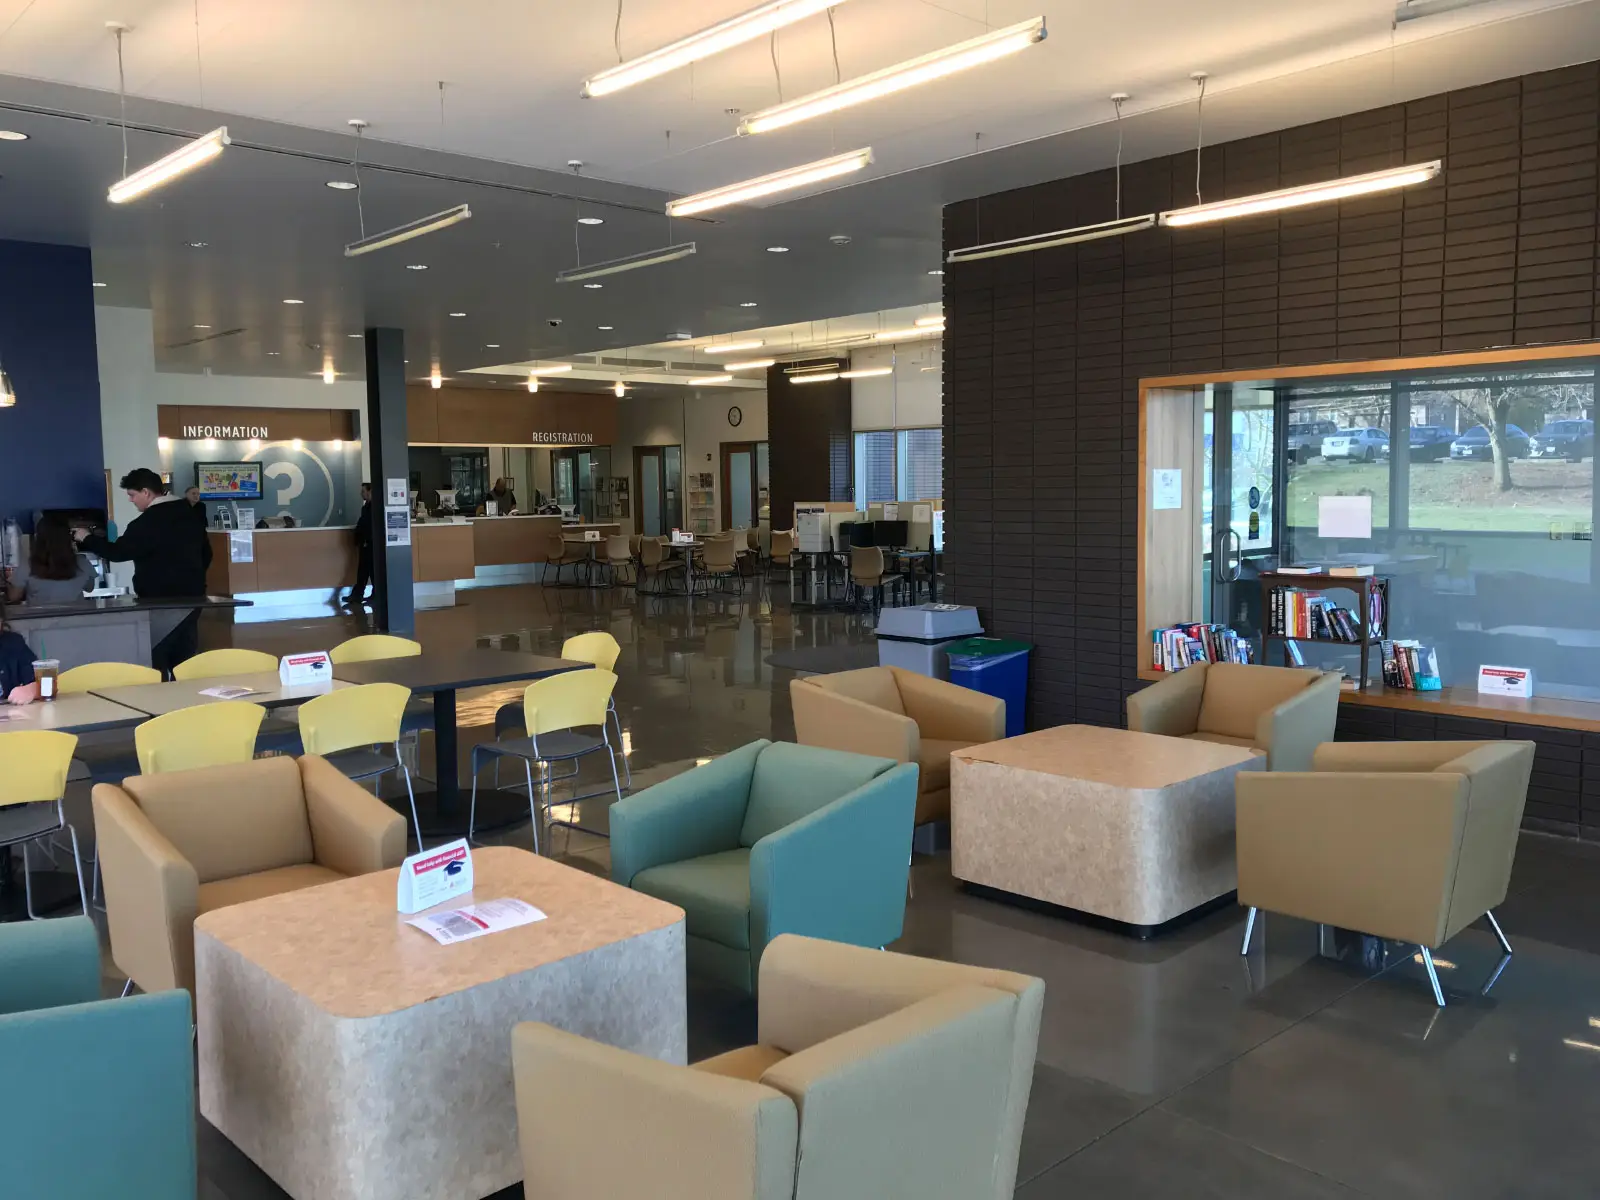 Series of chairs and tables in Harmony Campus lobby